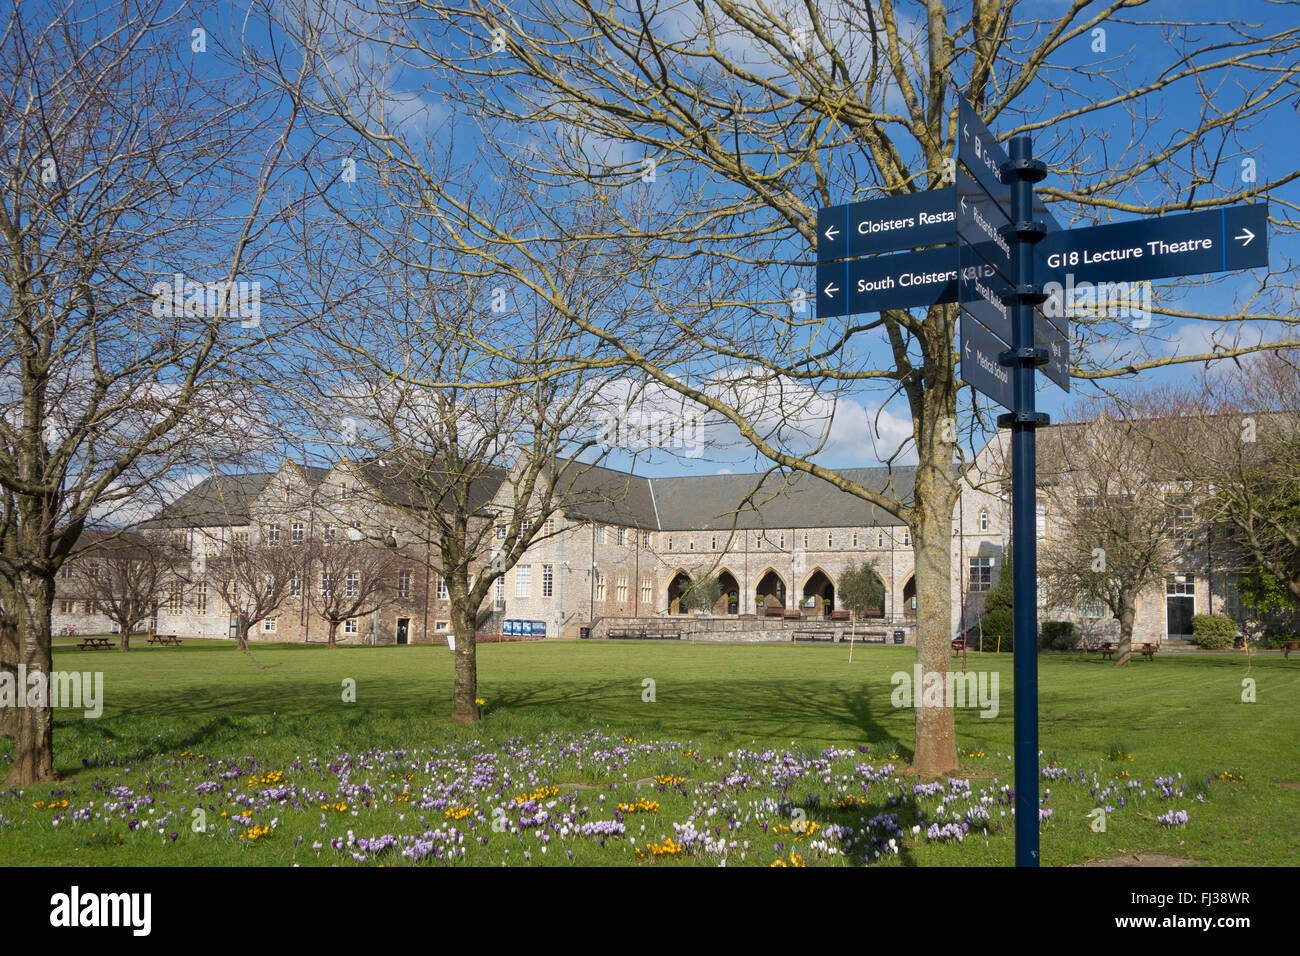 Exeter University St Luke's Campus - looking towards the arches of North Cloisters across the lawns of the quadrangle Stock Photo